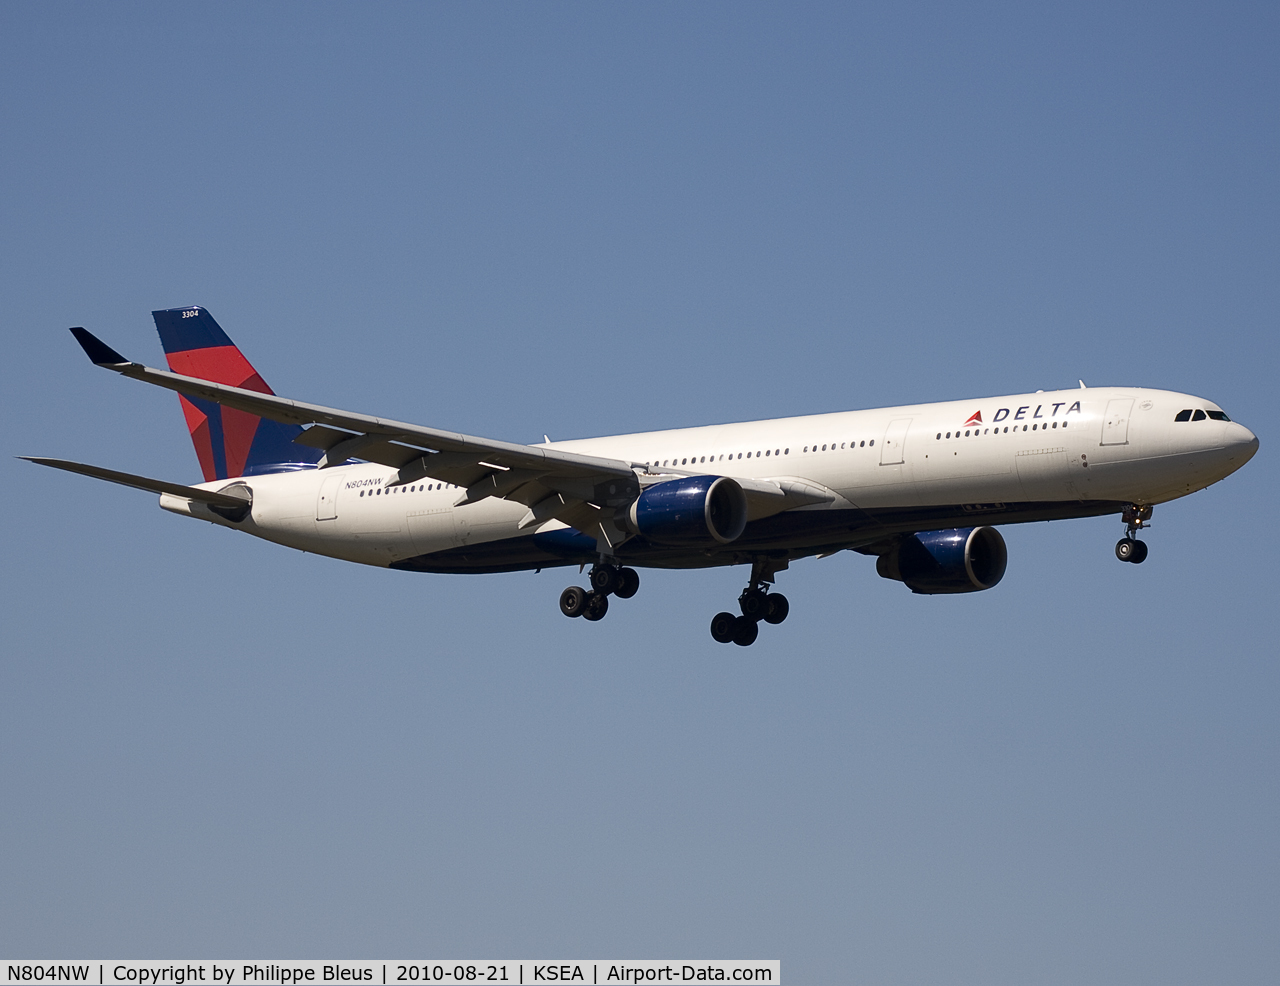 N804NW, 2003 Airbus A330-323 C/N 0549, My first Delta A330, I think. Short final rwy 34R. Who says Seattle has a rainy climate ?